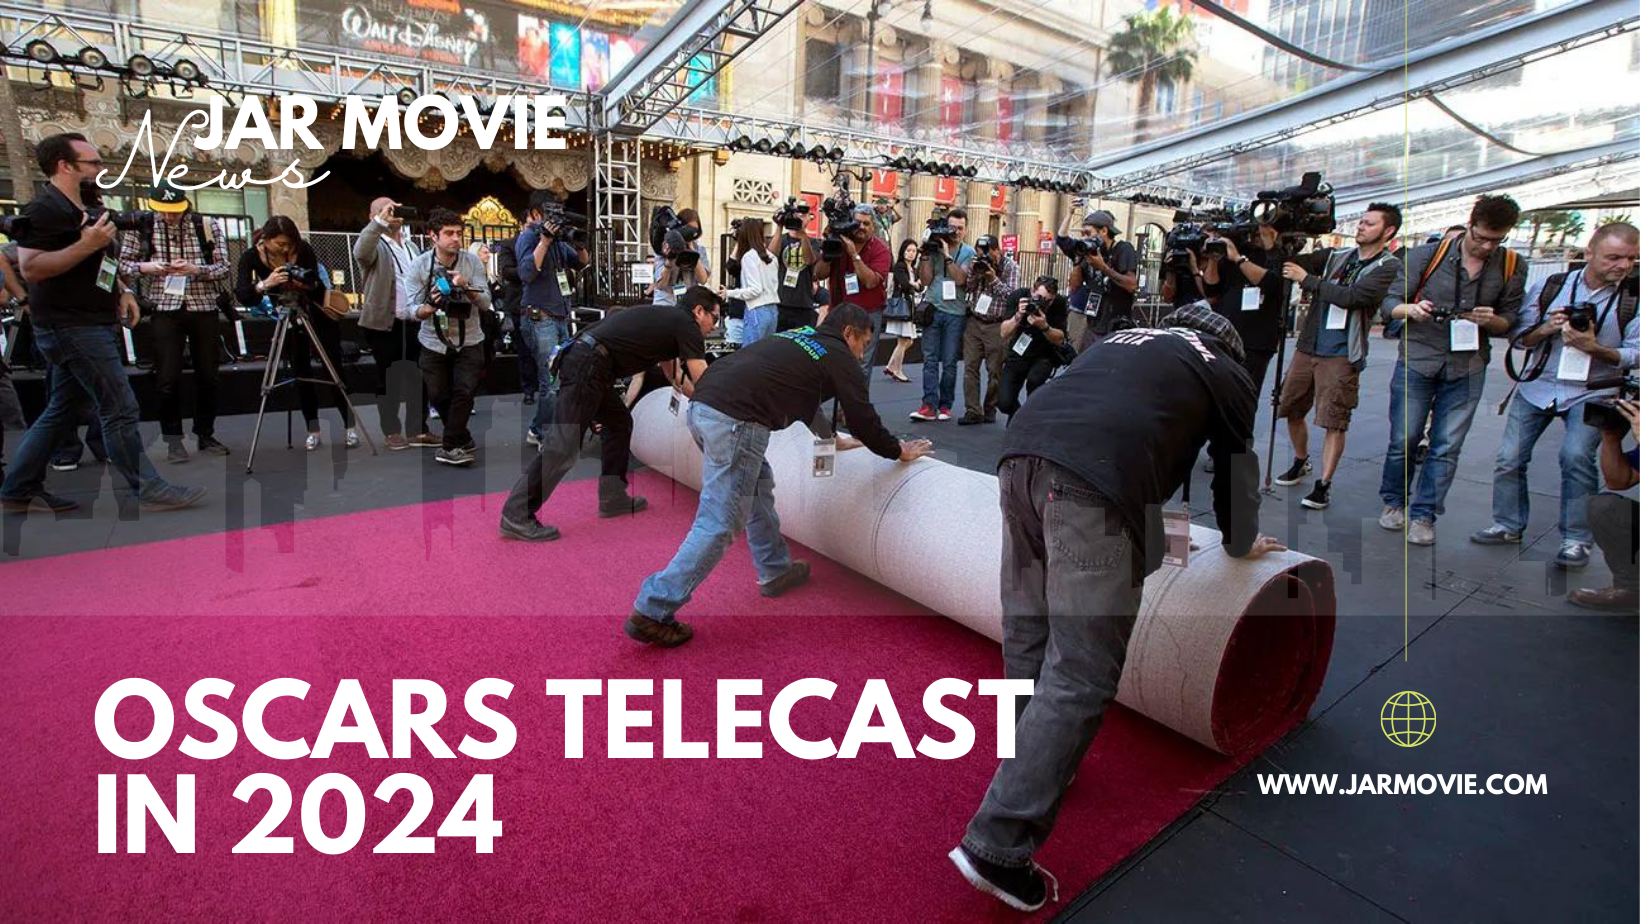 The Oscars Telecast in 2024 Will Begin Earlier Than Before, With "Abbott Elementary" Coming First